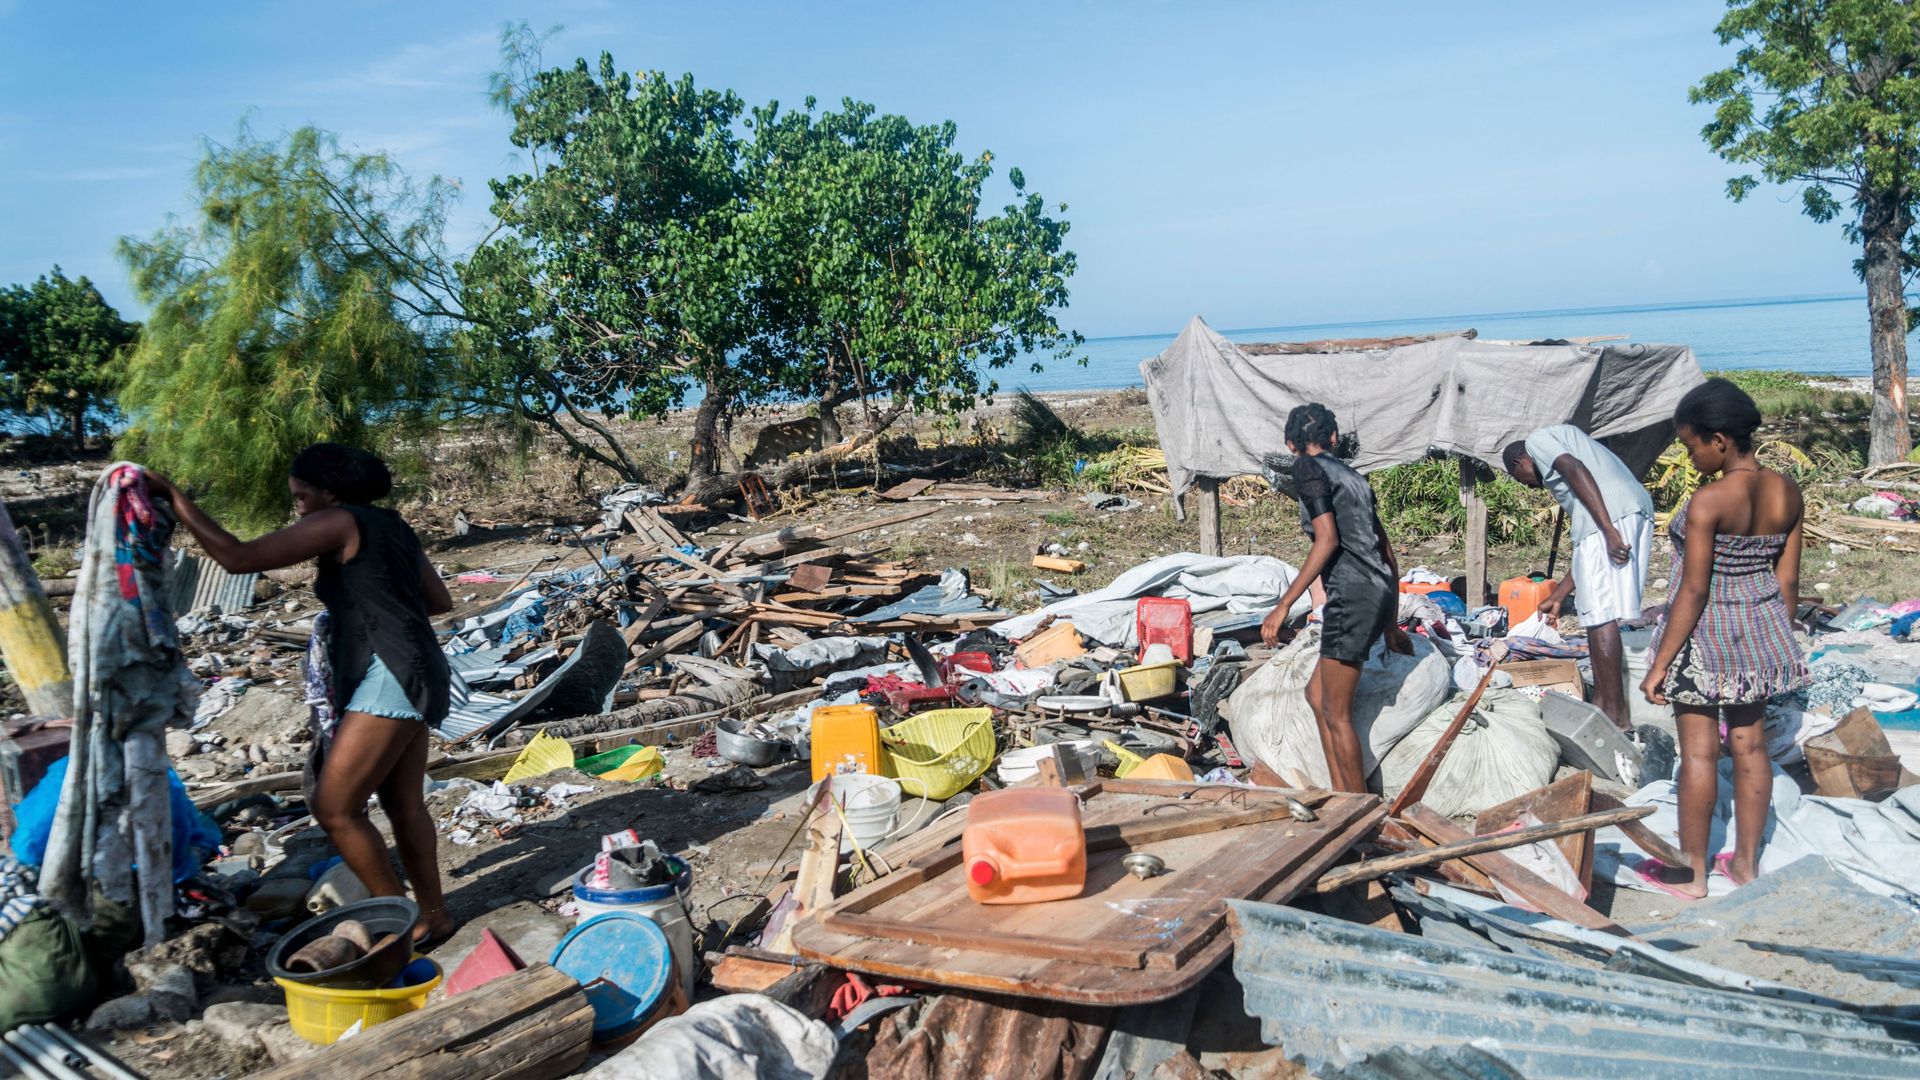 People clean up the remains of their home near the Haitian coast, which was devastated by an earthquake